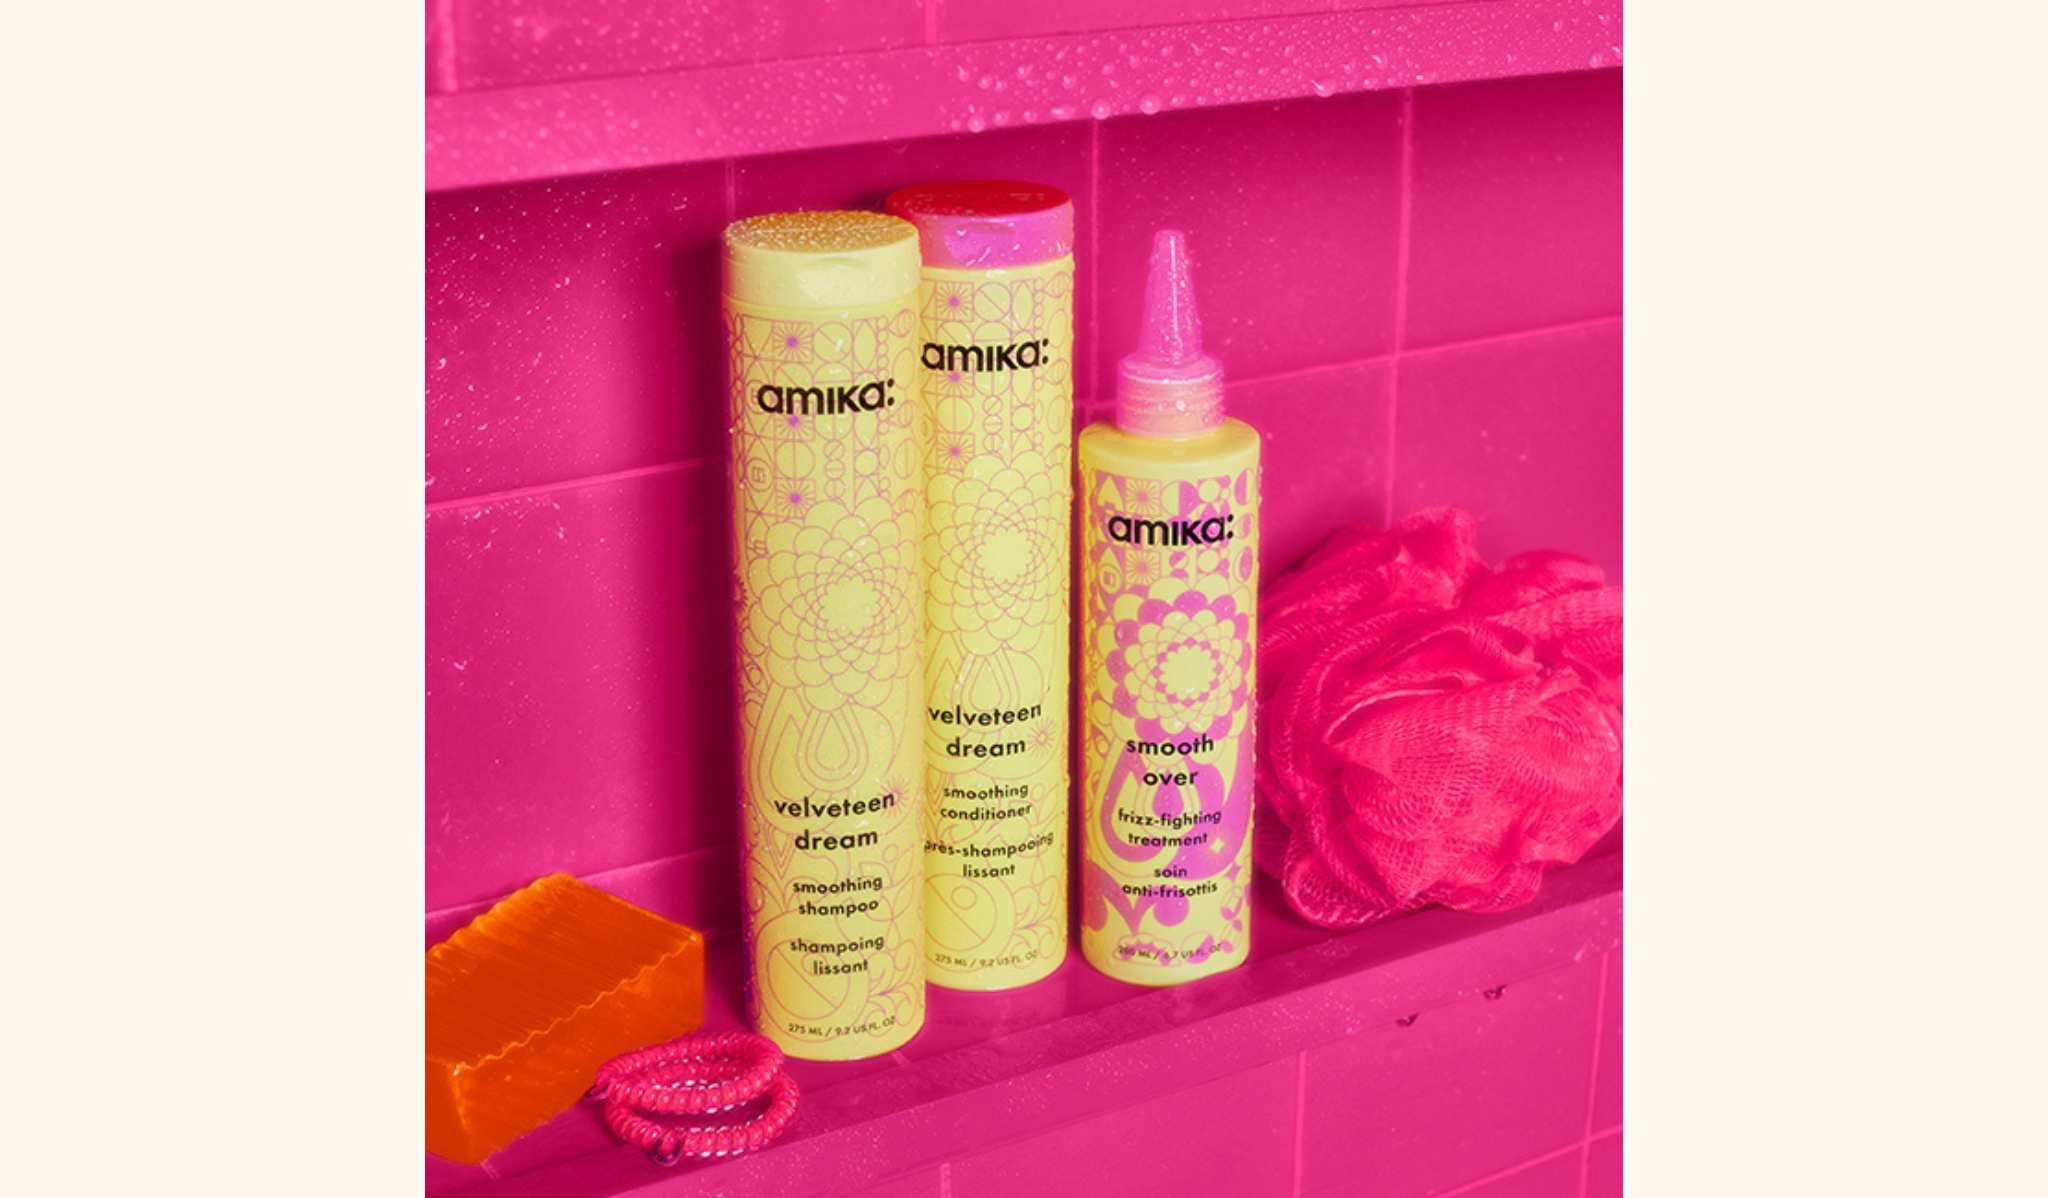 velveteen dream smoothing shampoo and conditioner and smooth over frizz-fighting treatment